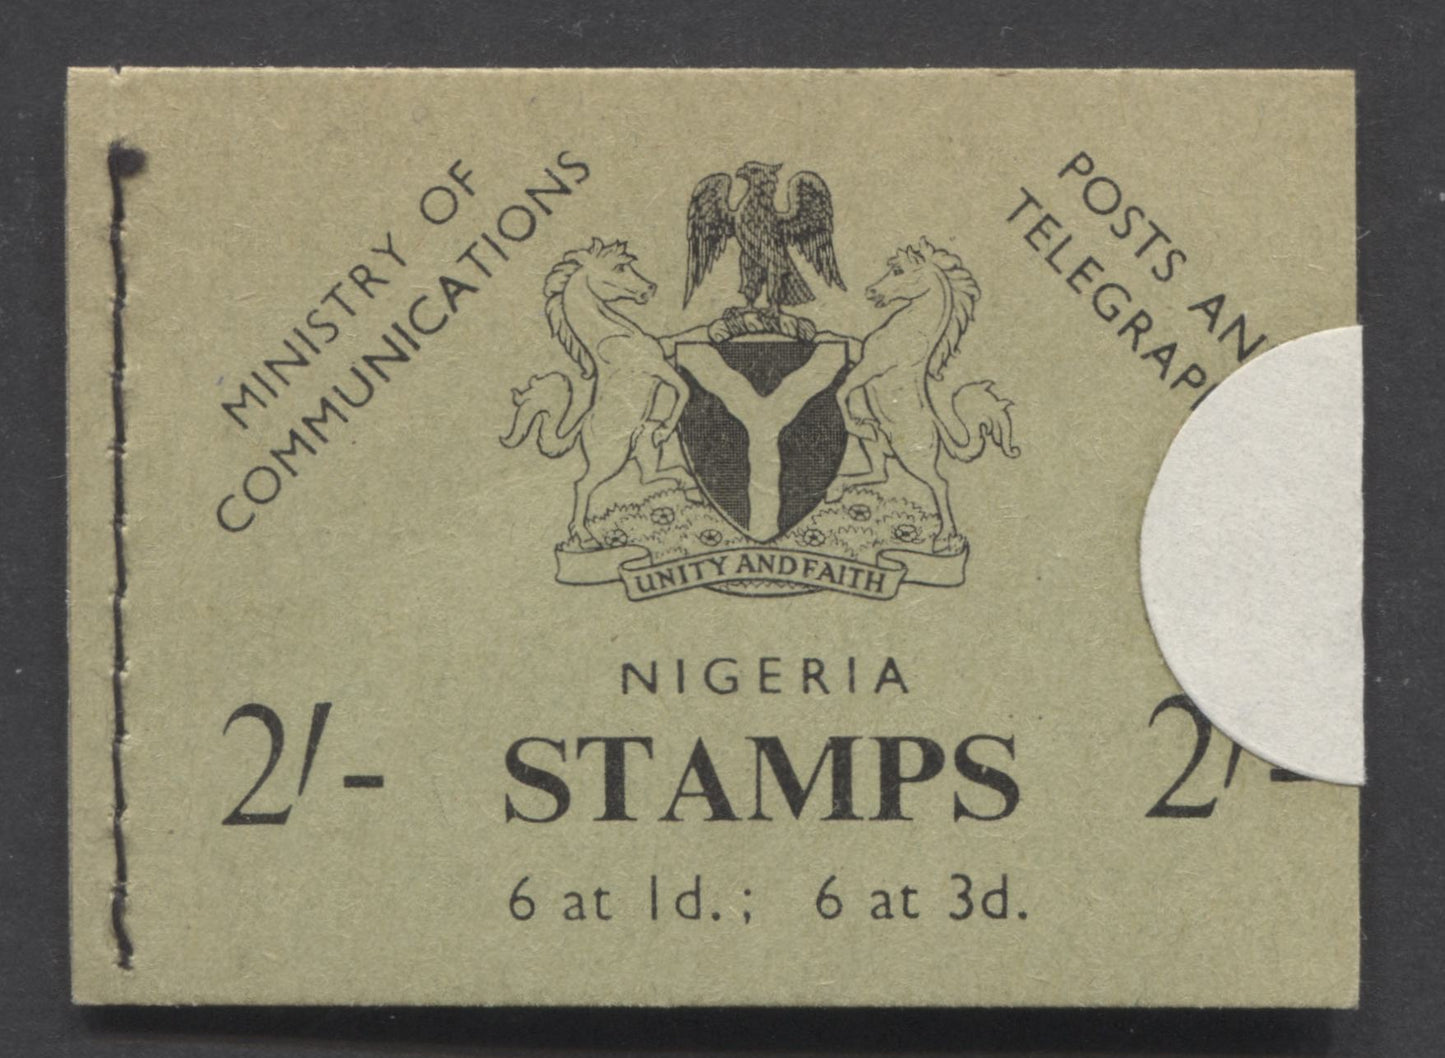 Lot 68 Nigeria SC#102a/105a 1961 Definitive Issue, Containing One Pane Each Of The 1d & 3d, A VFNH Complete Booklet, Click on Listing to See ALL Pictures, 2017 Scott Cat. $7.5